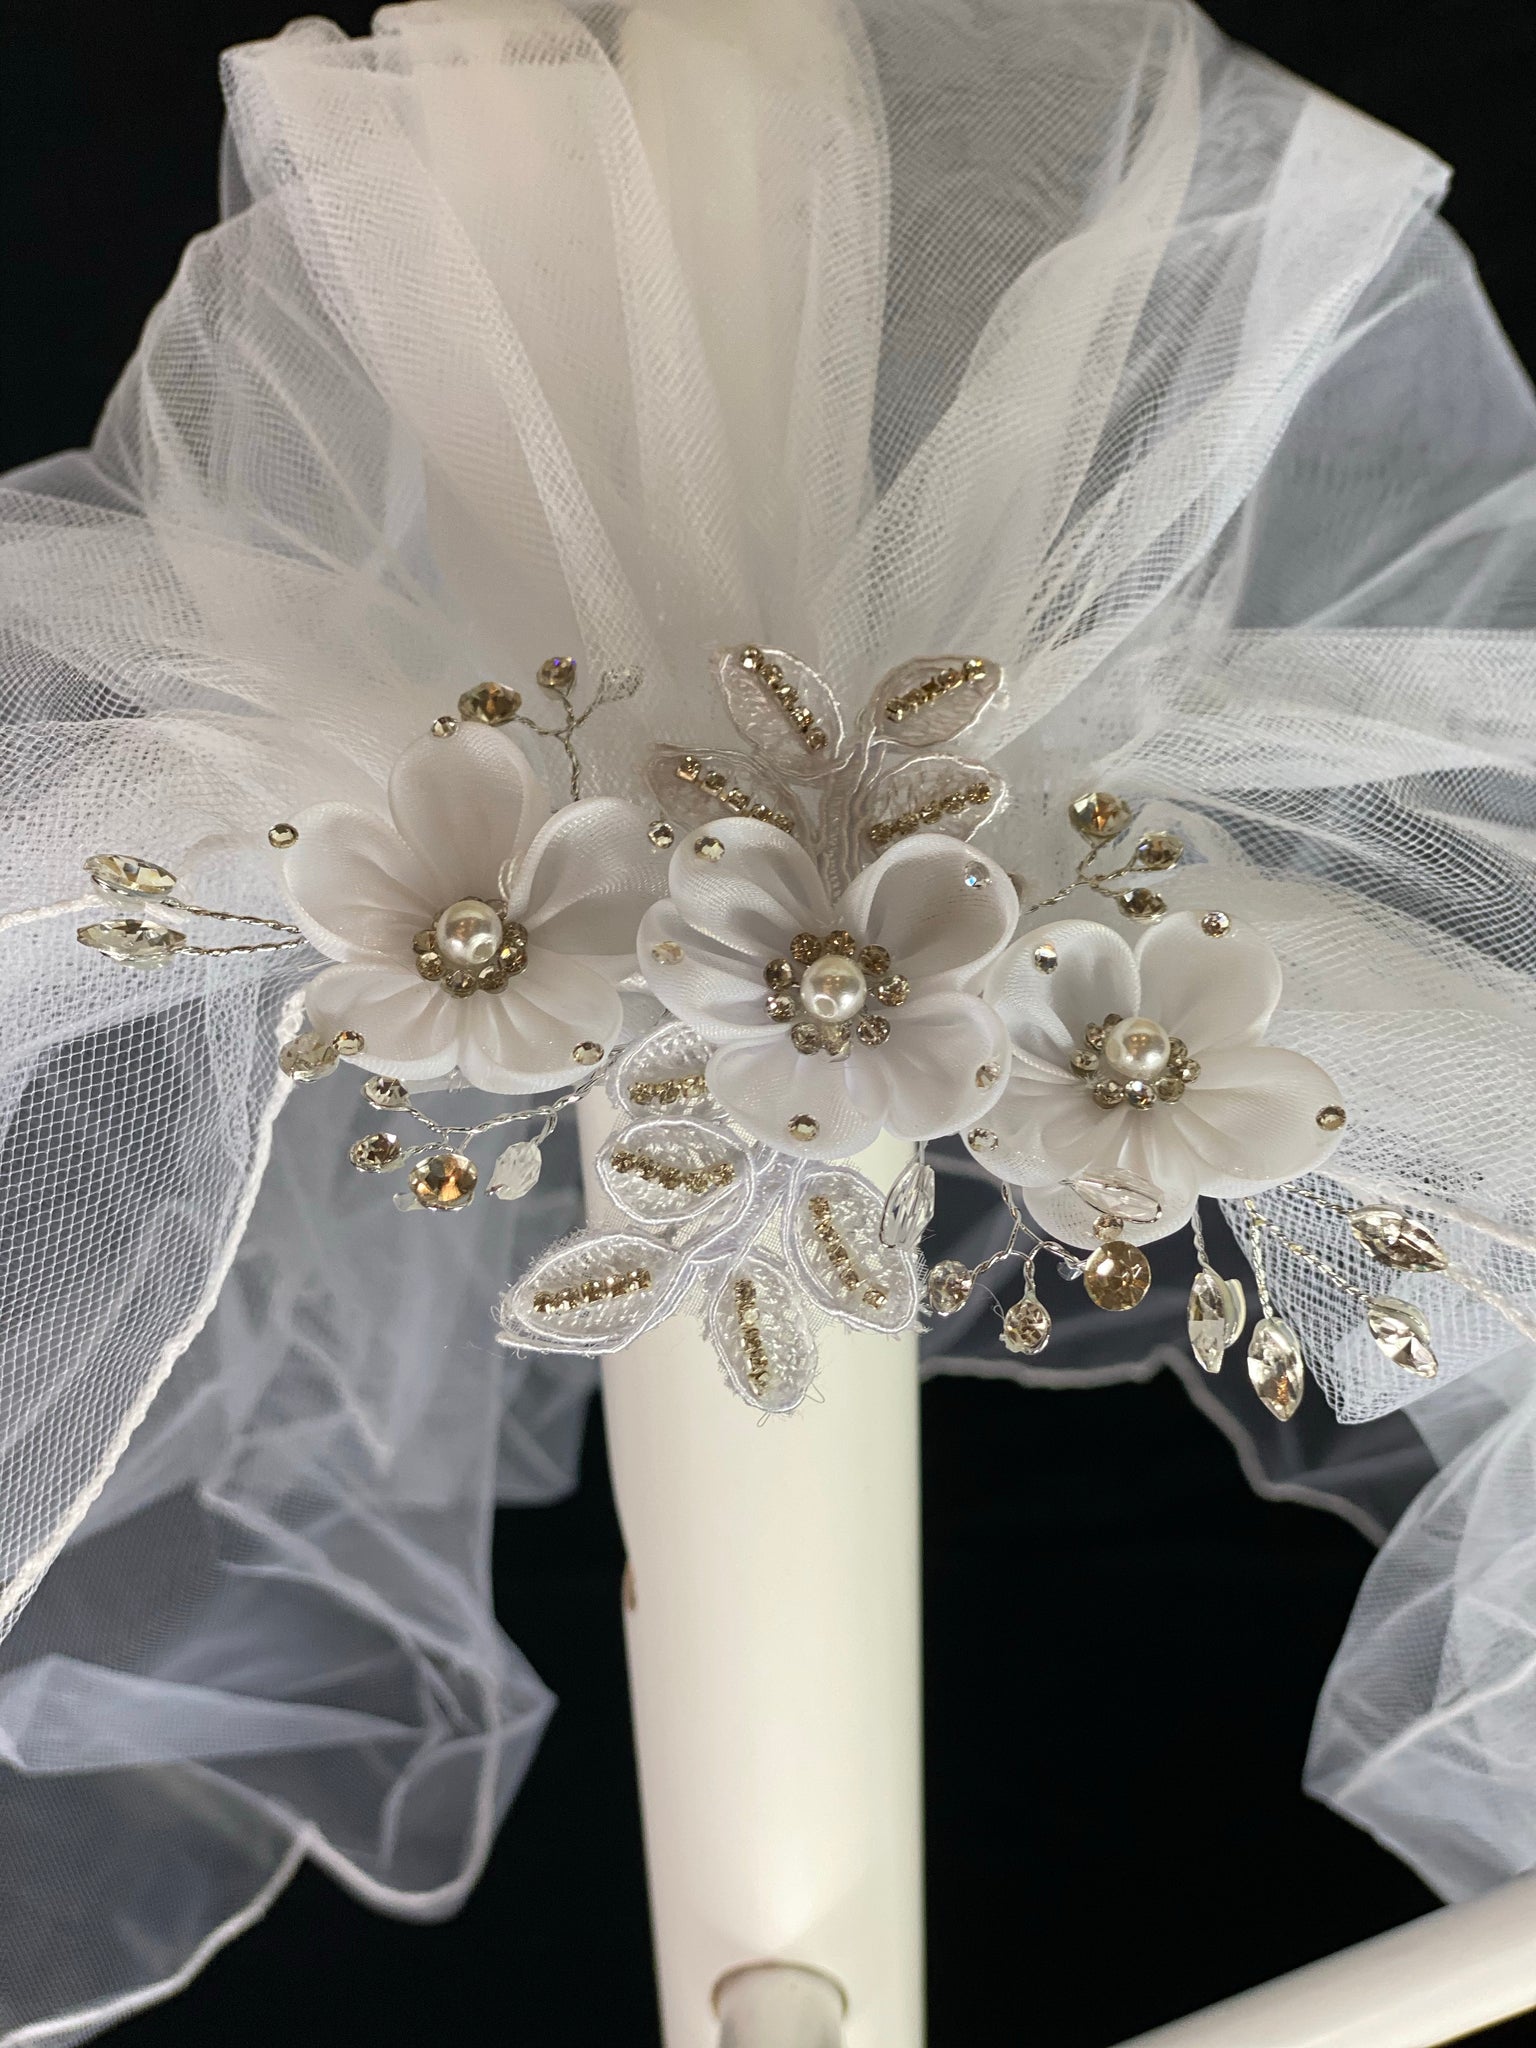 Veil - White Elegant First Communion Veil on Decorative Comb  Elegant soft 2 layer tulle veil with delicate hand stitched braided satin trim around the edge and handmade decorative comb with lace leaves. Beautiful organza flowers through center with pearl centers and rhinestones on petals. Embroidered leaves surrounding the flowers.   This double layered veil reaches approximately 21" long. Veil has 2" long, 3" wide, comb to secure it in place. 